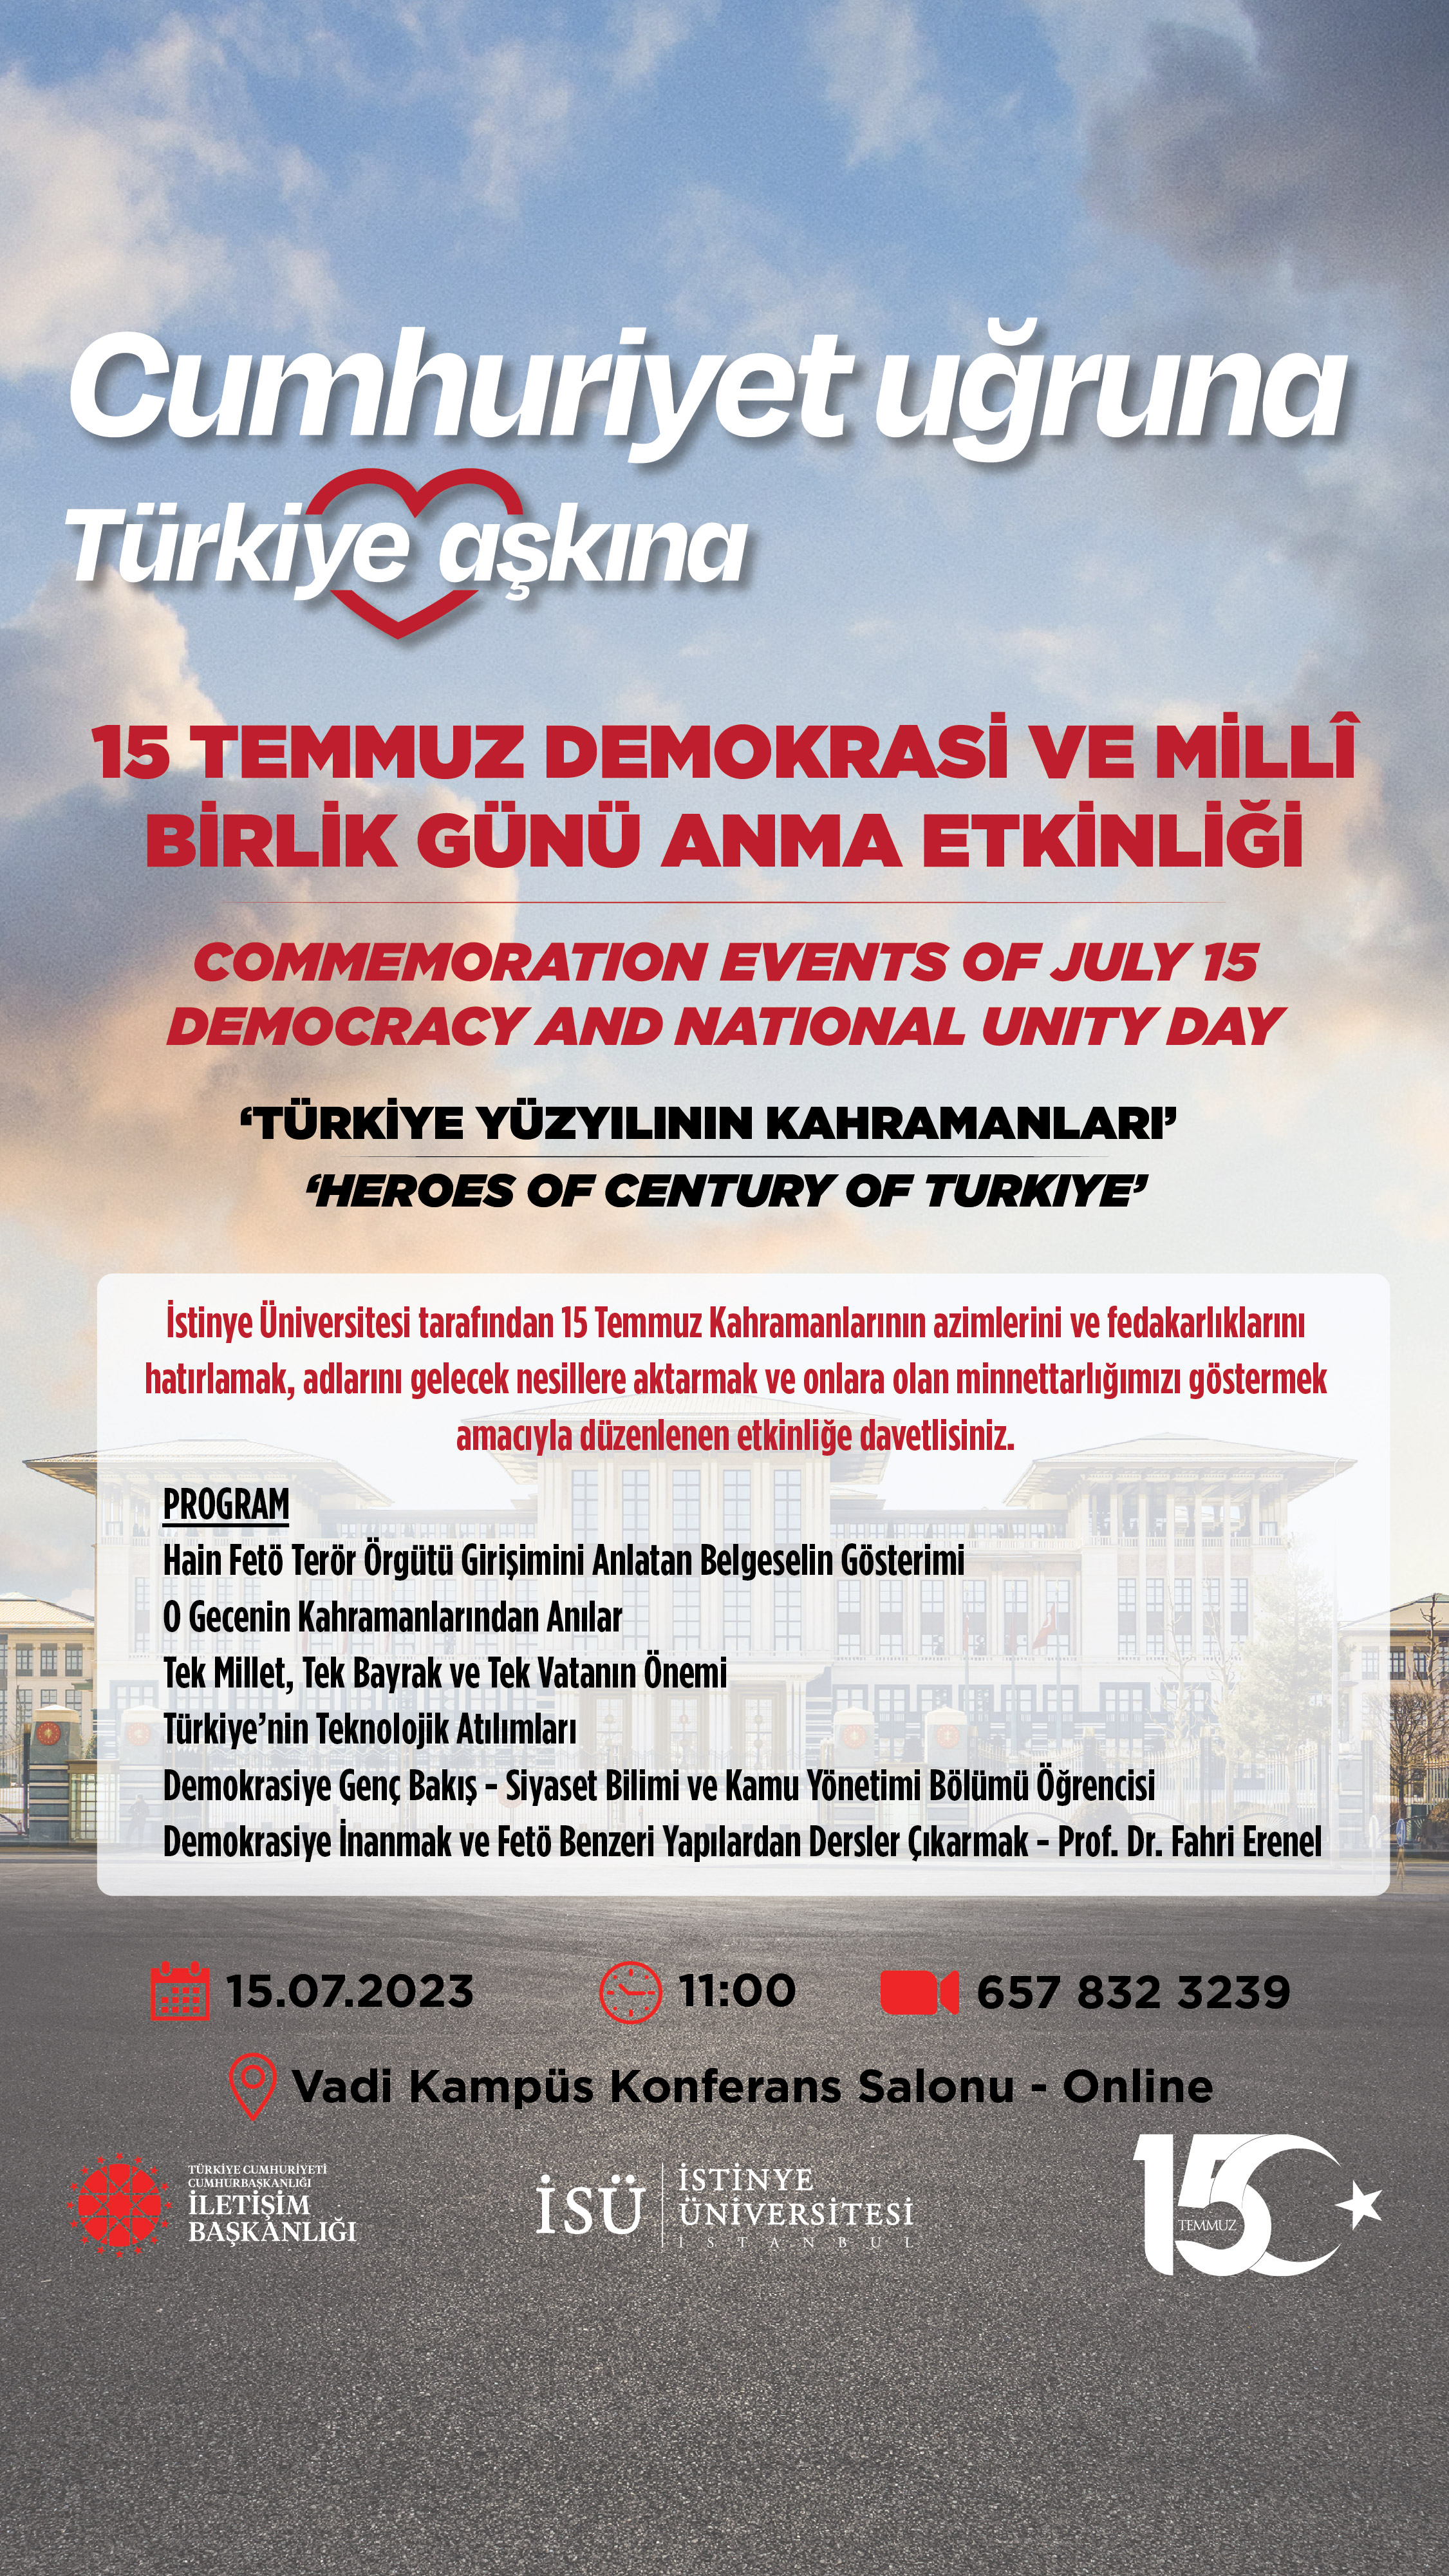  15 July Democracy and National Unity Day Commemoration Event "Heroes of the Turkish Century"